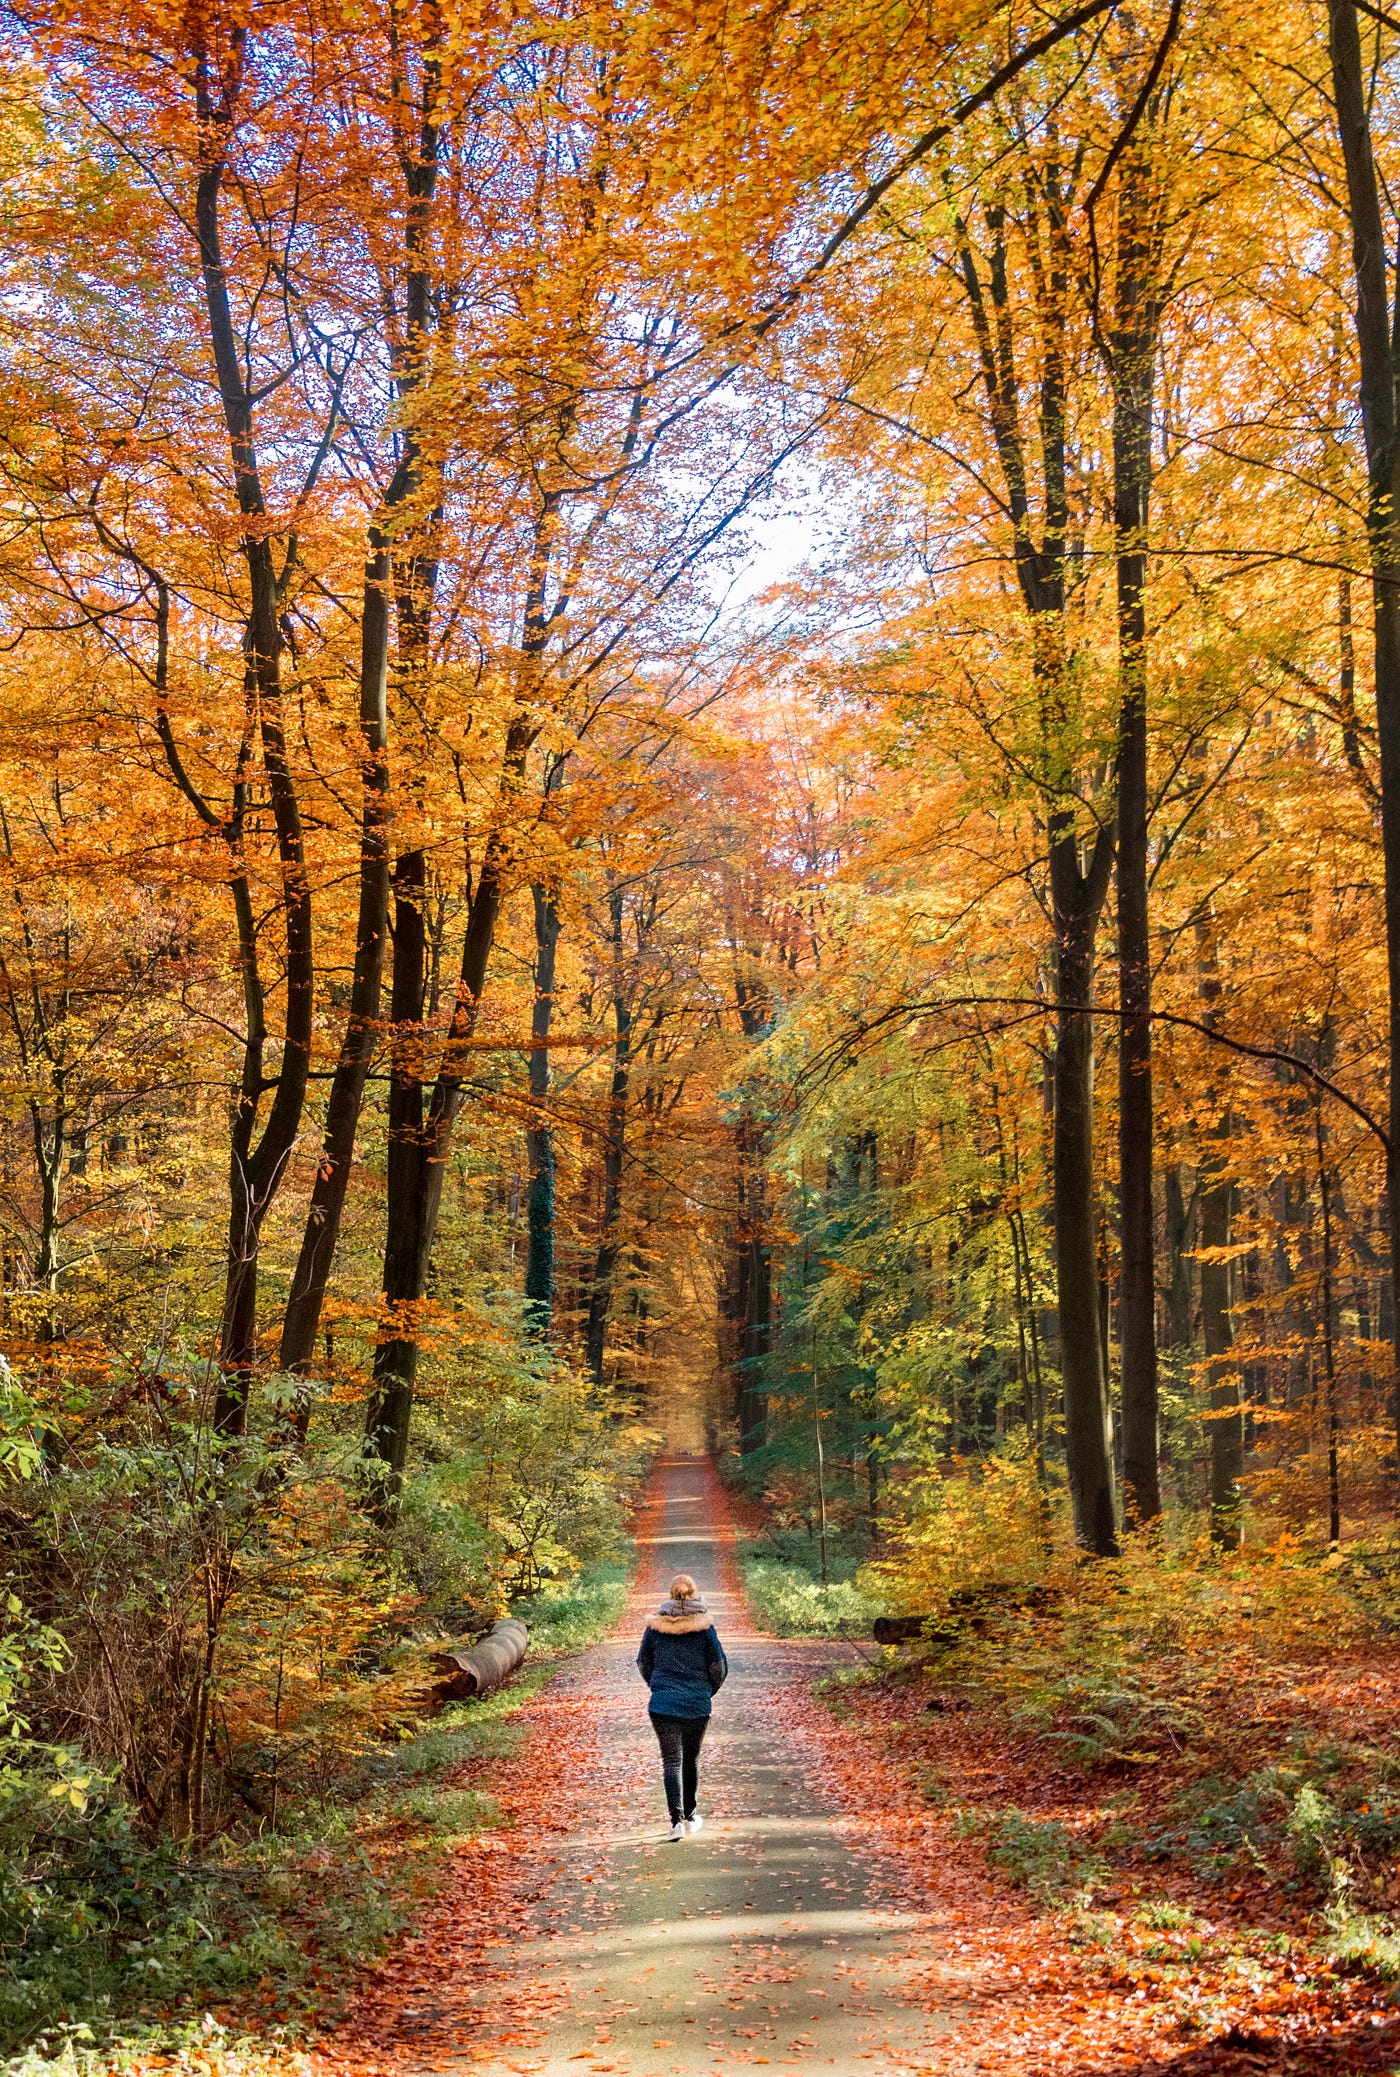 A woman walks away from us, in the woods and surrounded by autumn foliage. The leaves are mostly orange; there are some green leaves, too. The woman wears a medium length blue jacket.